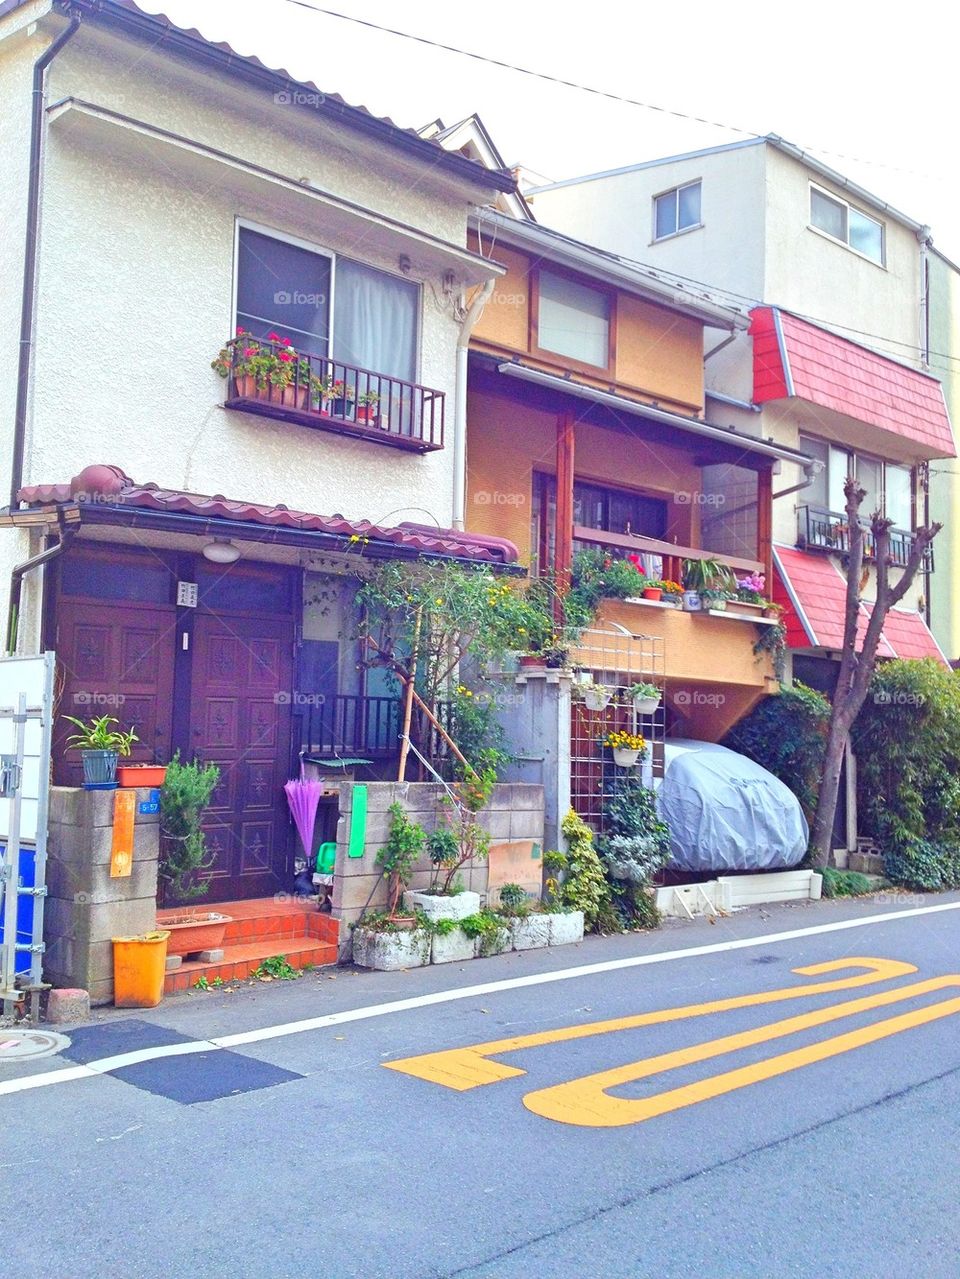 Scenes from Japan: Tokyo townhouse